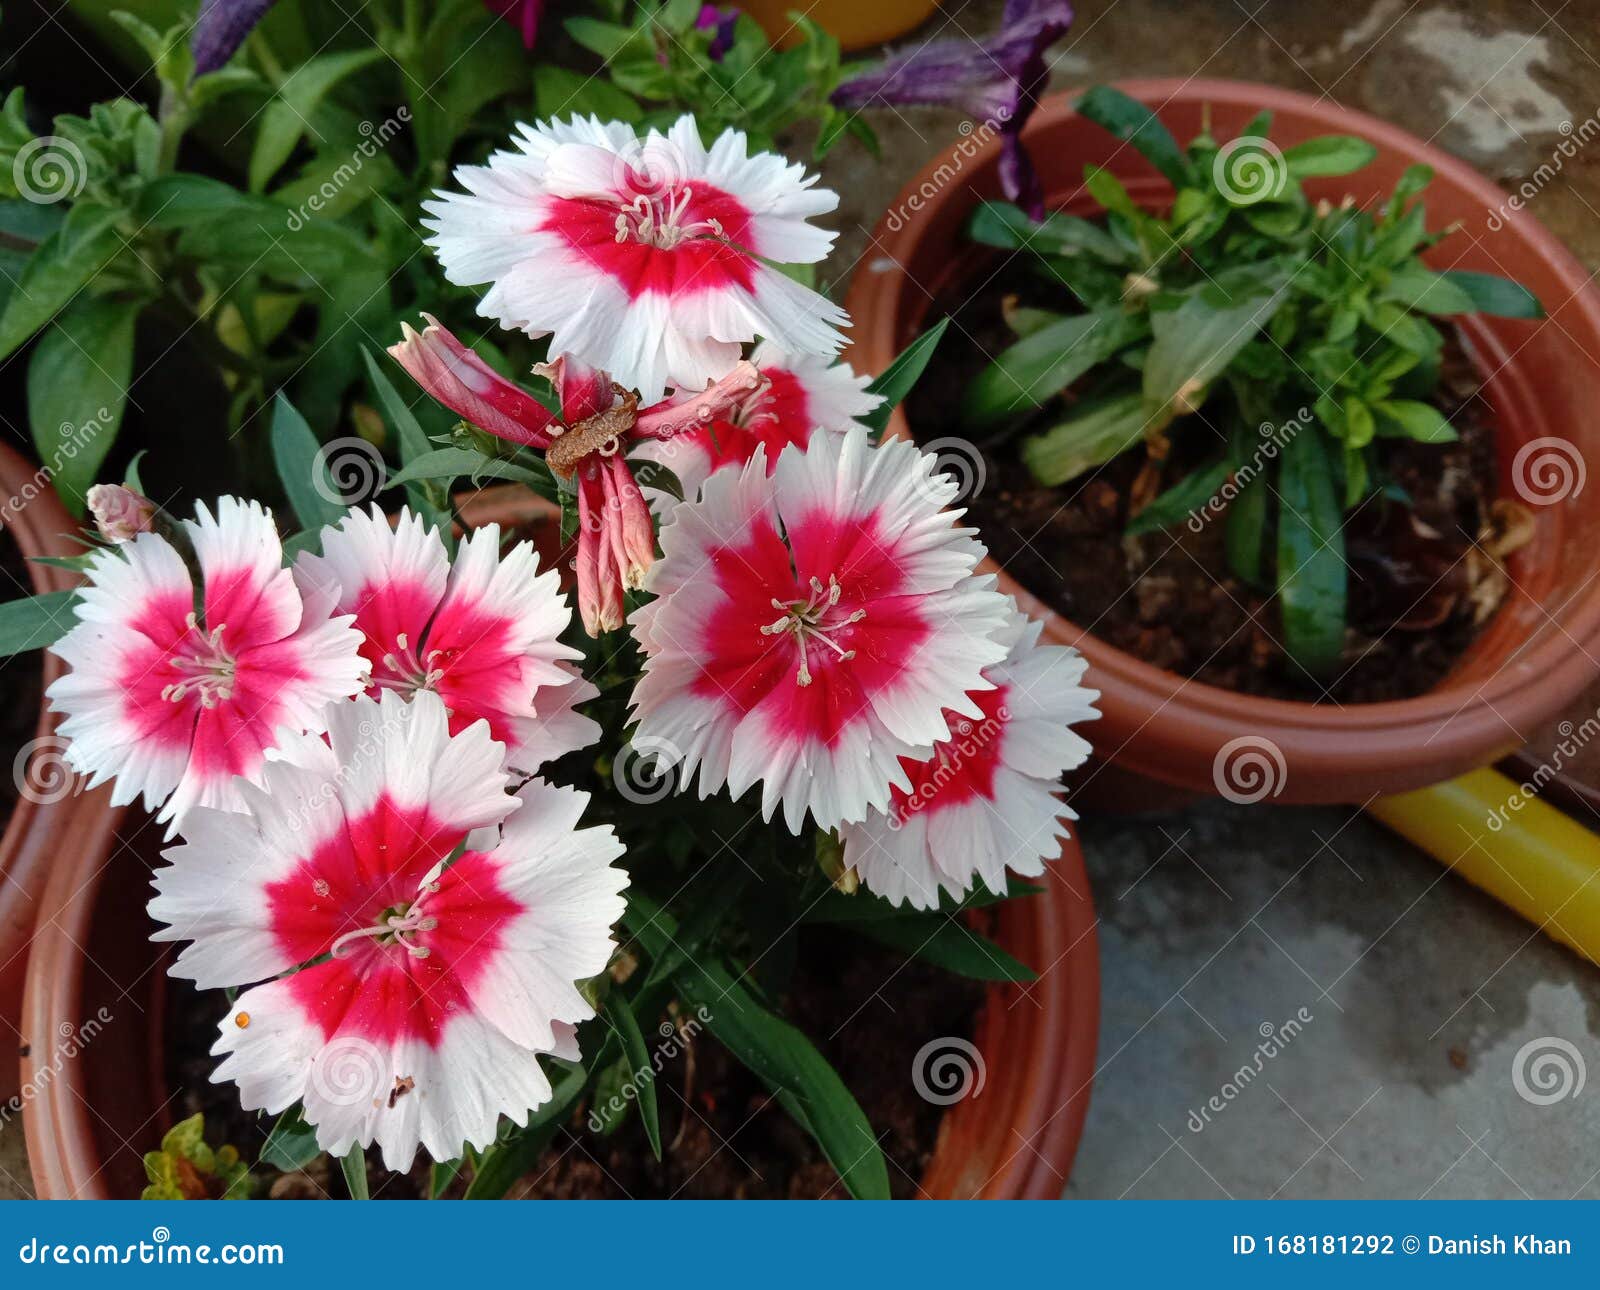 white dianthus flowers with red shade giving a beautiful look